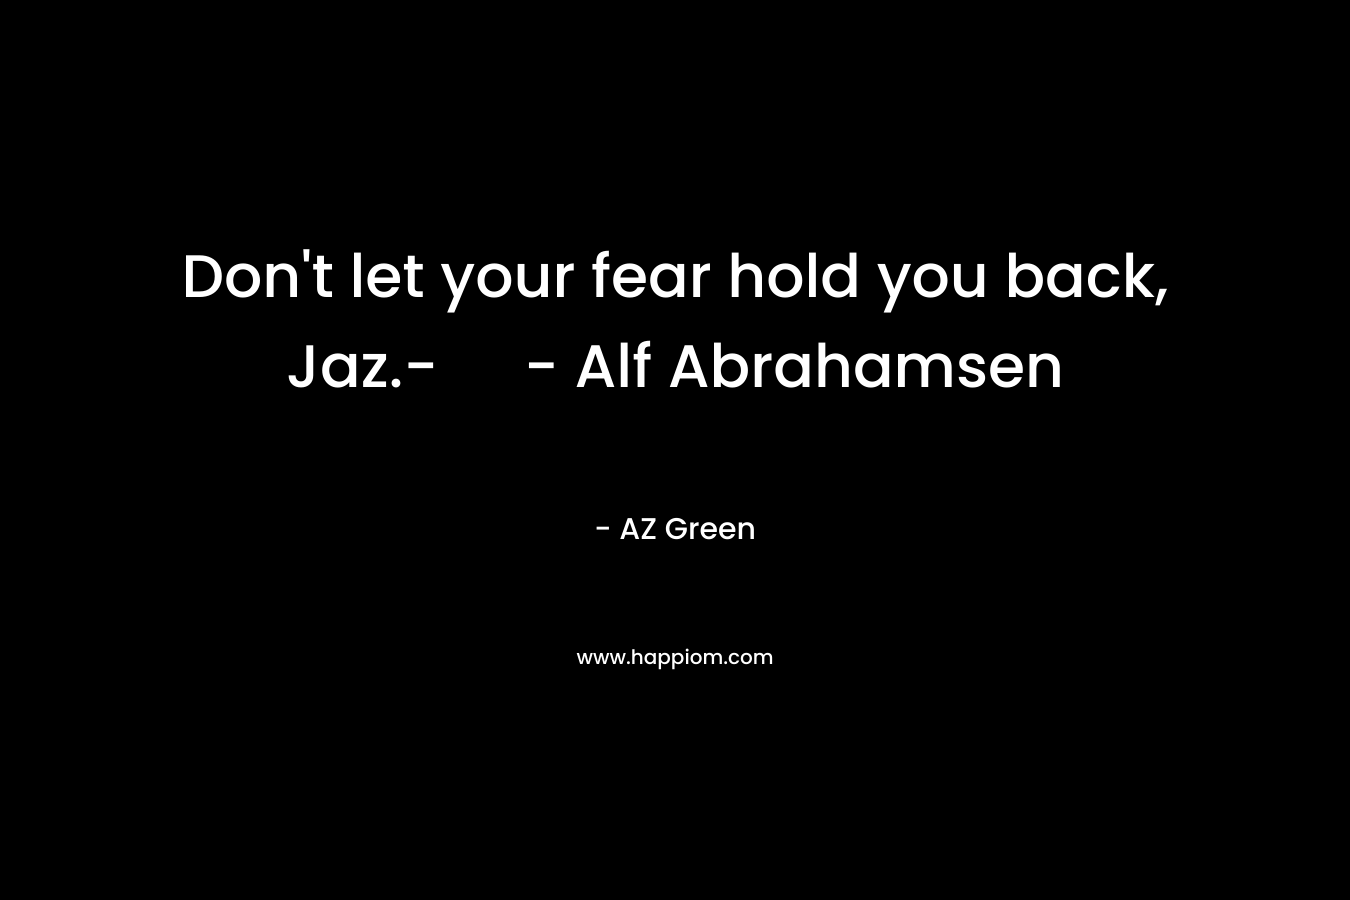 Don't let your fear hold you back, Jaz.- - Alf Abrahamsen